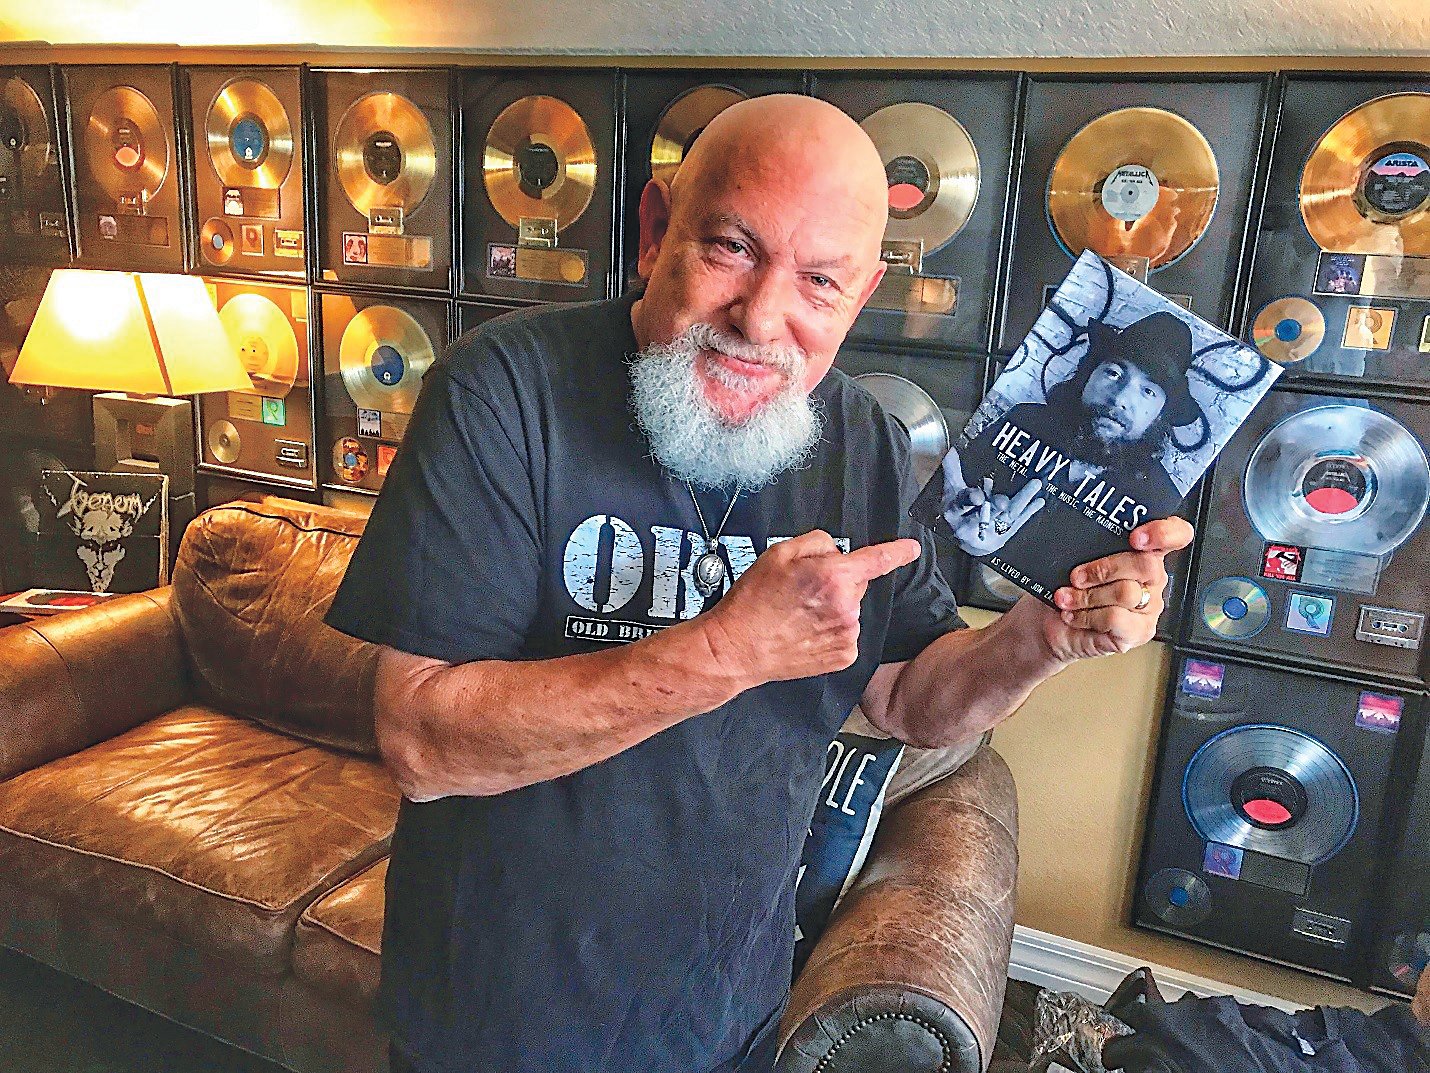 Former New Hope shop owner Jon Zazula, “Jonny Z,” points to his autobiography, detailing his life as a record label owner and concert promoter. Photograph by Gary Schwartz.